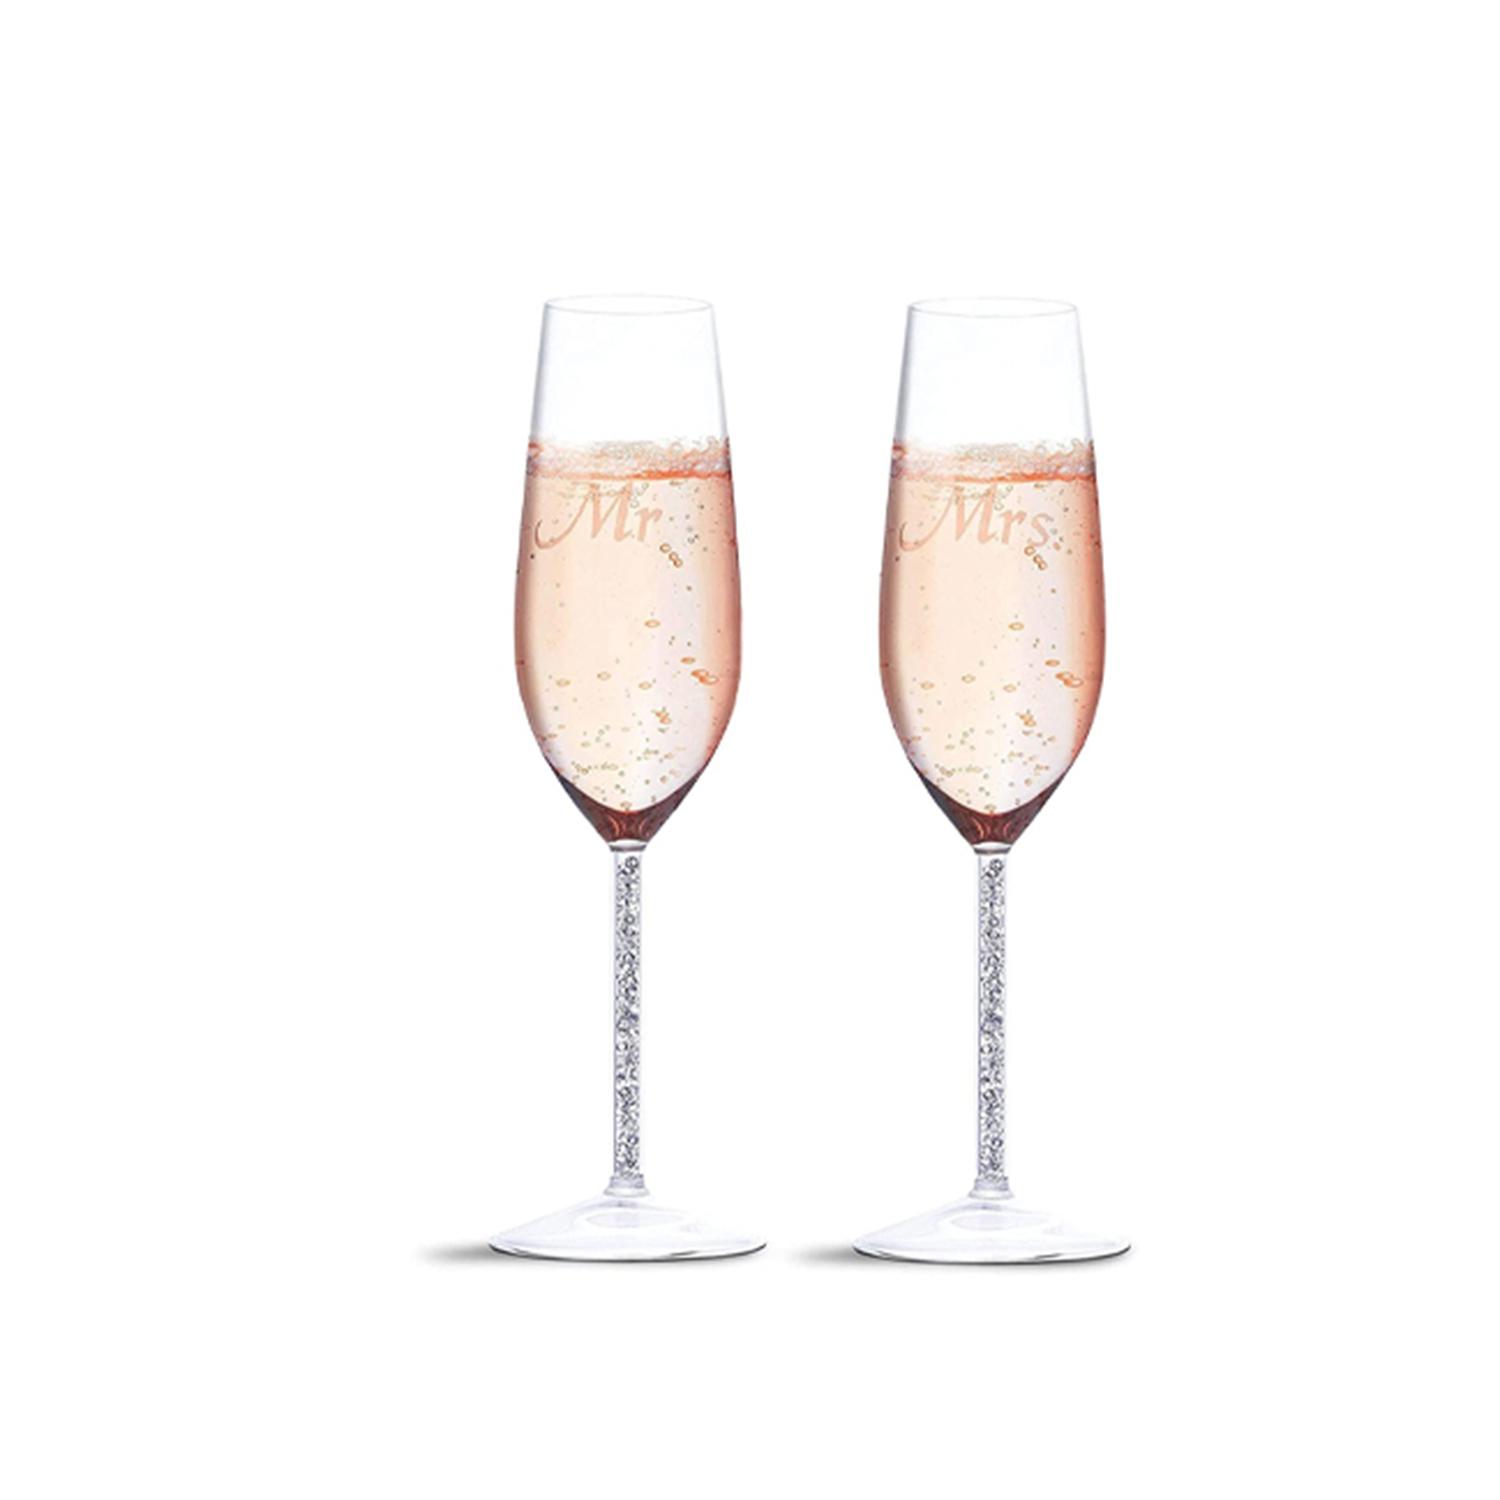 ALL PURPOSE FLUTE WINE GLASS ENGRAVED 1PC